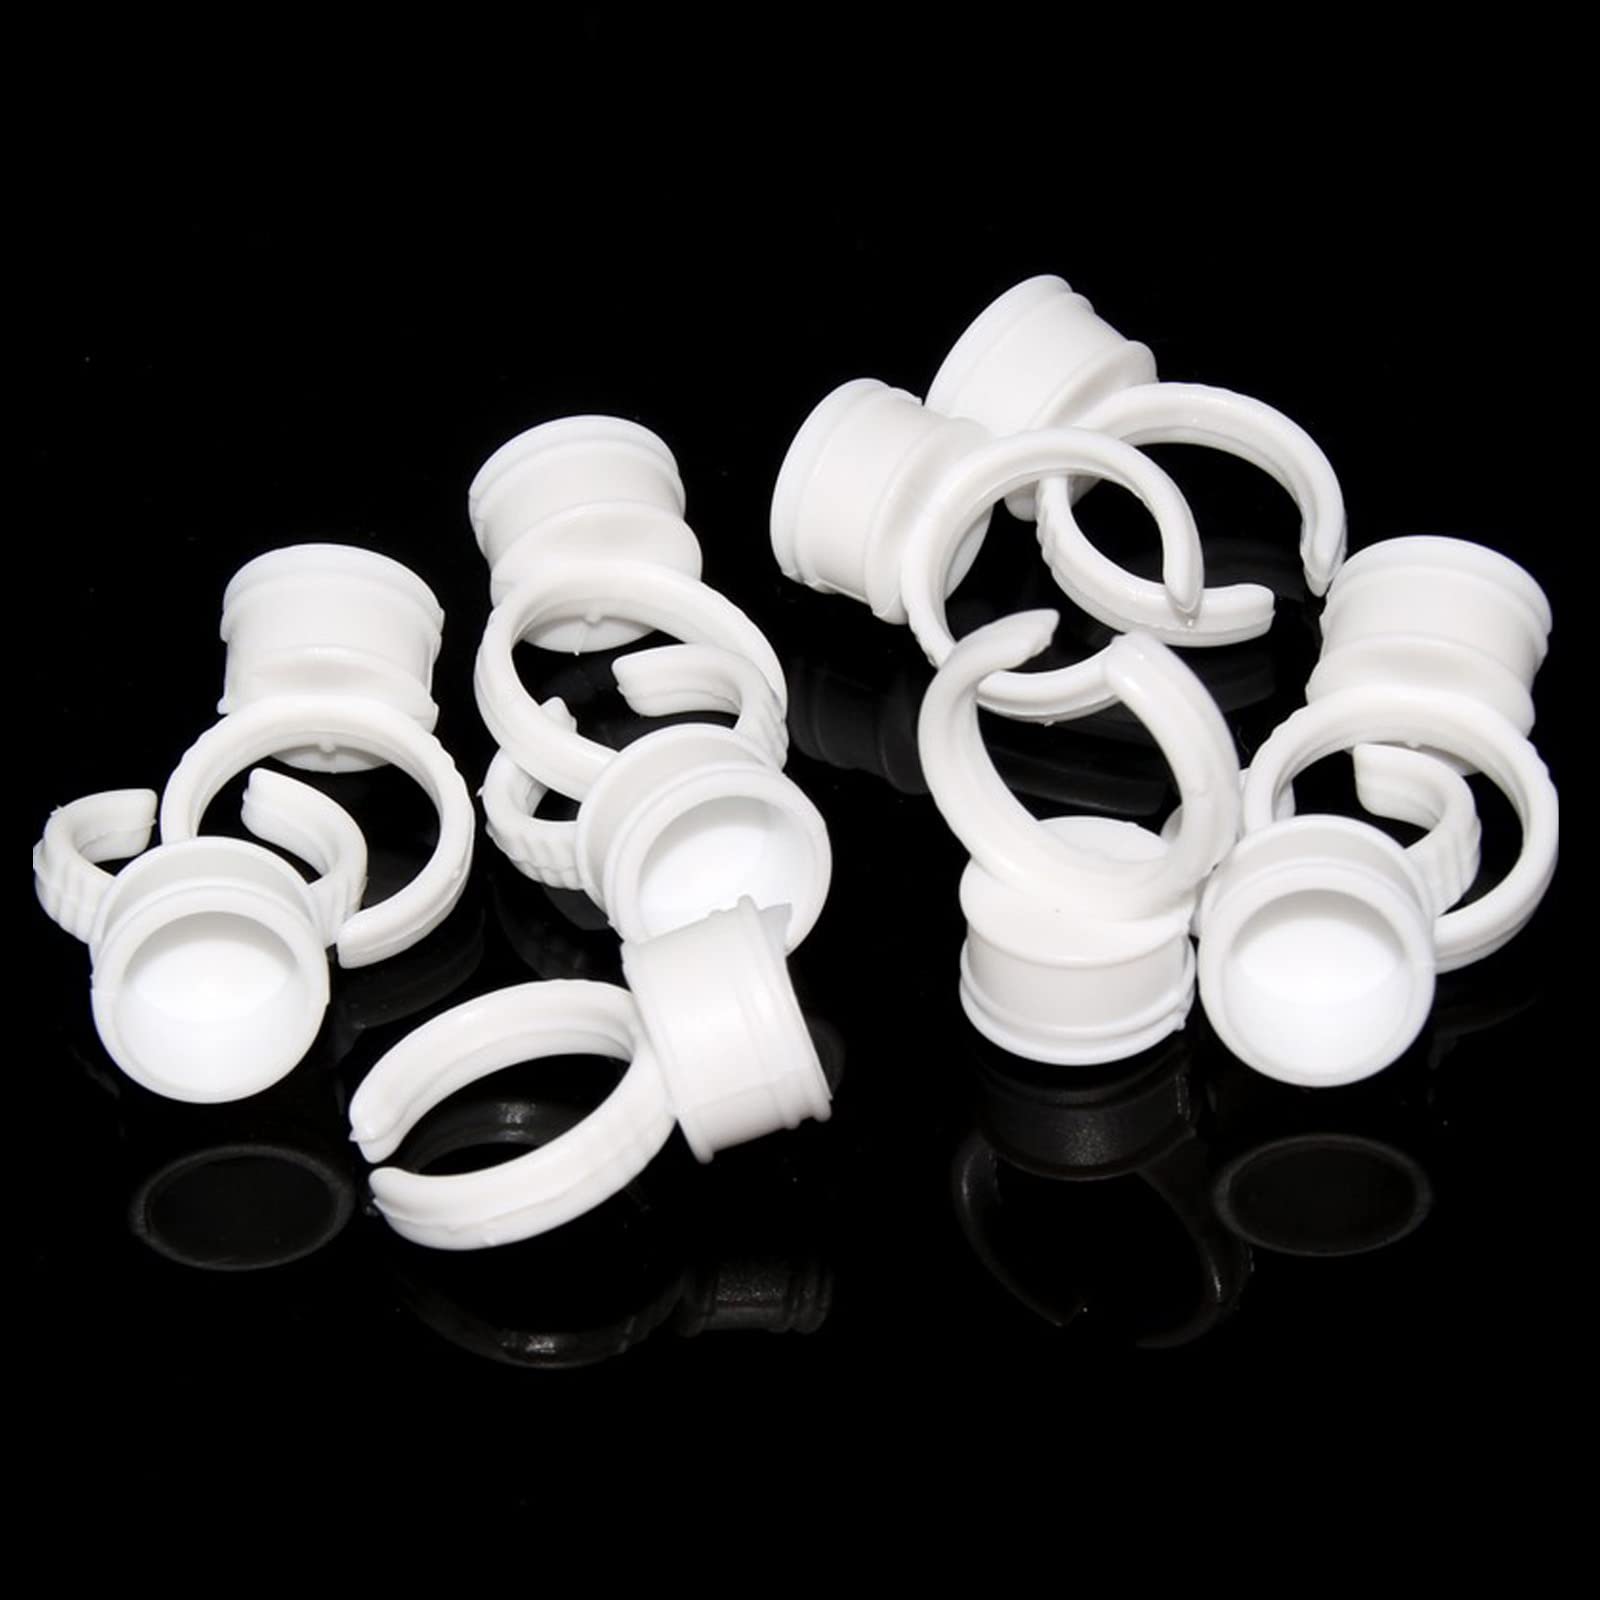 COOSKIN 100pcs Microblading Pigment Glue Rings Tattoo Ink Holder for Eyelash Extension Rings